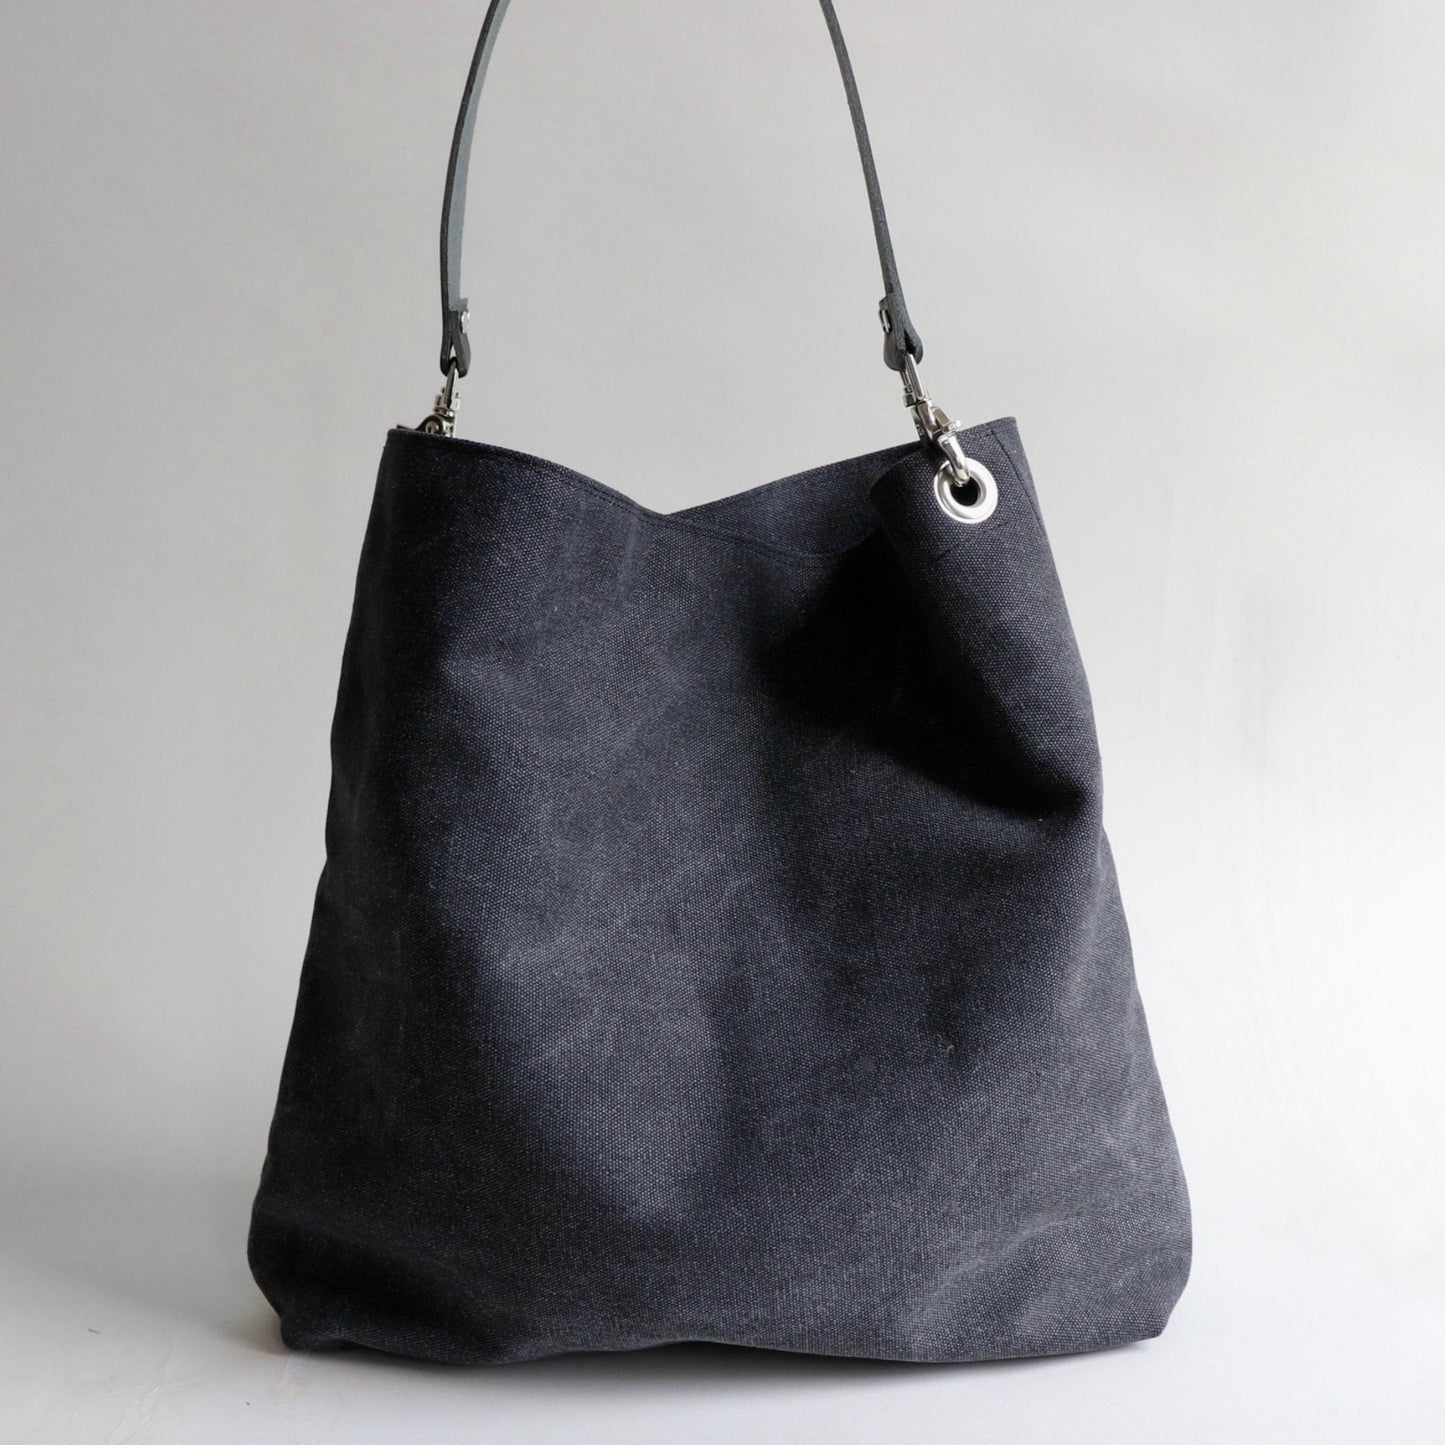 Back view of of slouchy gray hobo tote bag